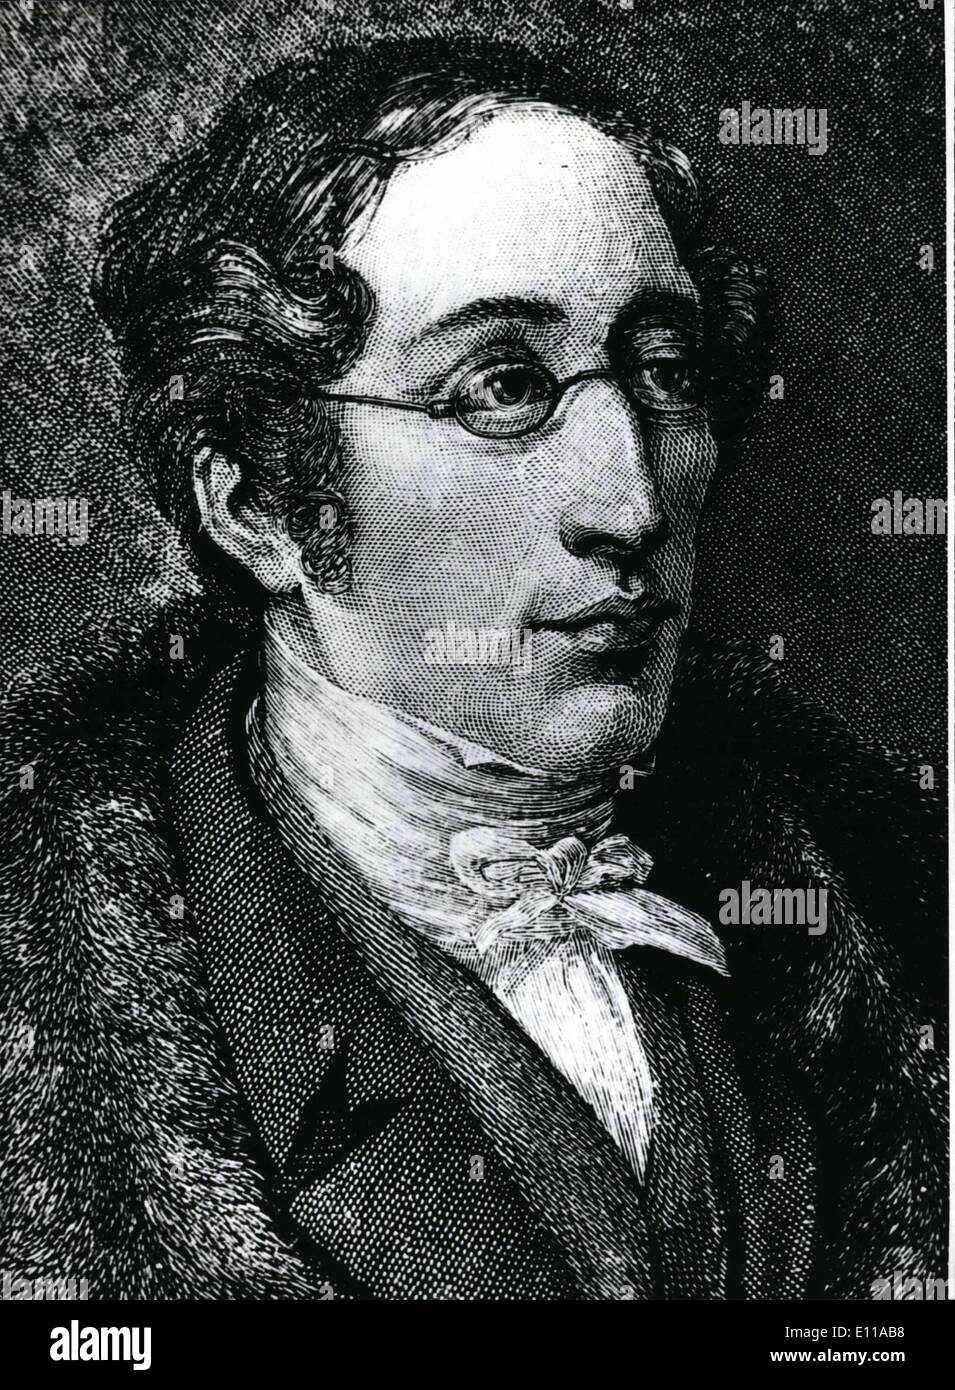 Jun. 06, 1976 - 150th Anniversary of Death of Carl Maria von Weber: On June 5th, 1976 it will be 150 years ago, that famous German composer Carl Maria Von Weber (picture) died in London. The musician, born in Eutin/Germany in 1786, was educated by Micheal Haydn at Salzburg and abbot Vogler at Vienna/Austria. 1804 he became opera conductor at Breslau, two years later he got in service of Wuerttembergian sovereigns. 1813 he went to Prague, where he was an opera-conductor again and in 1817 he got this position at the new Deutsche Oper in Dresden Stock Photo